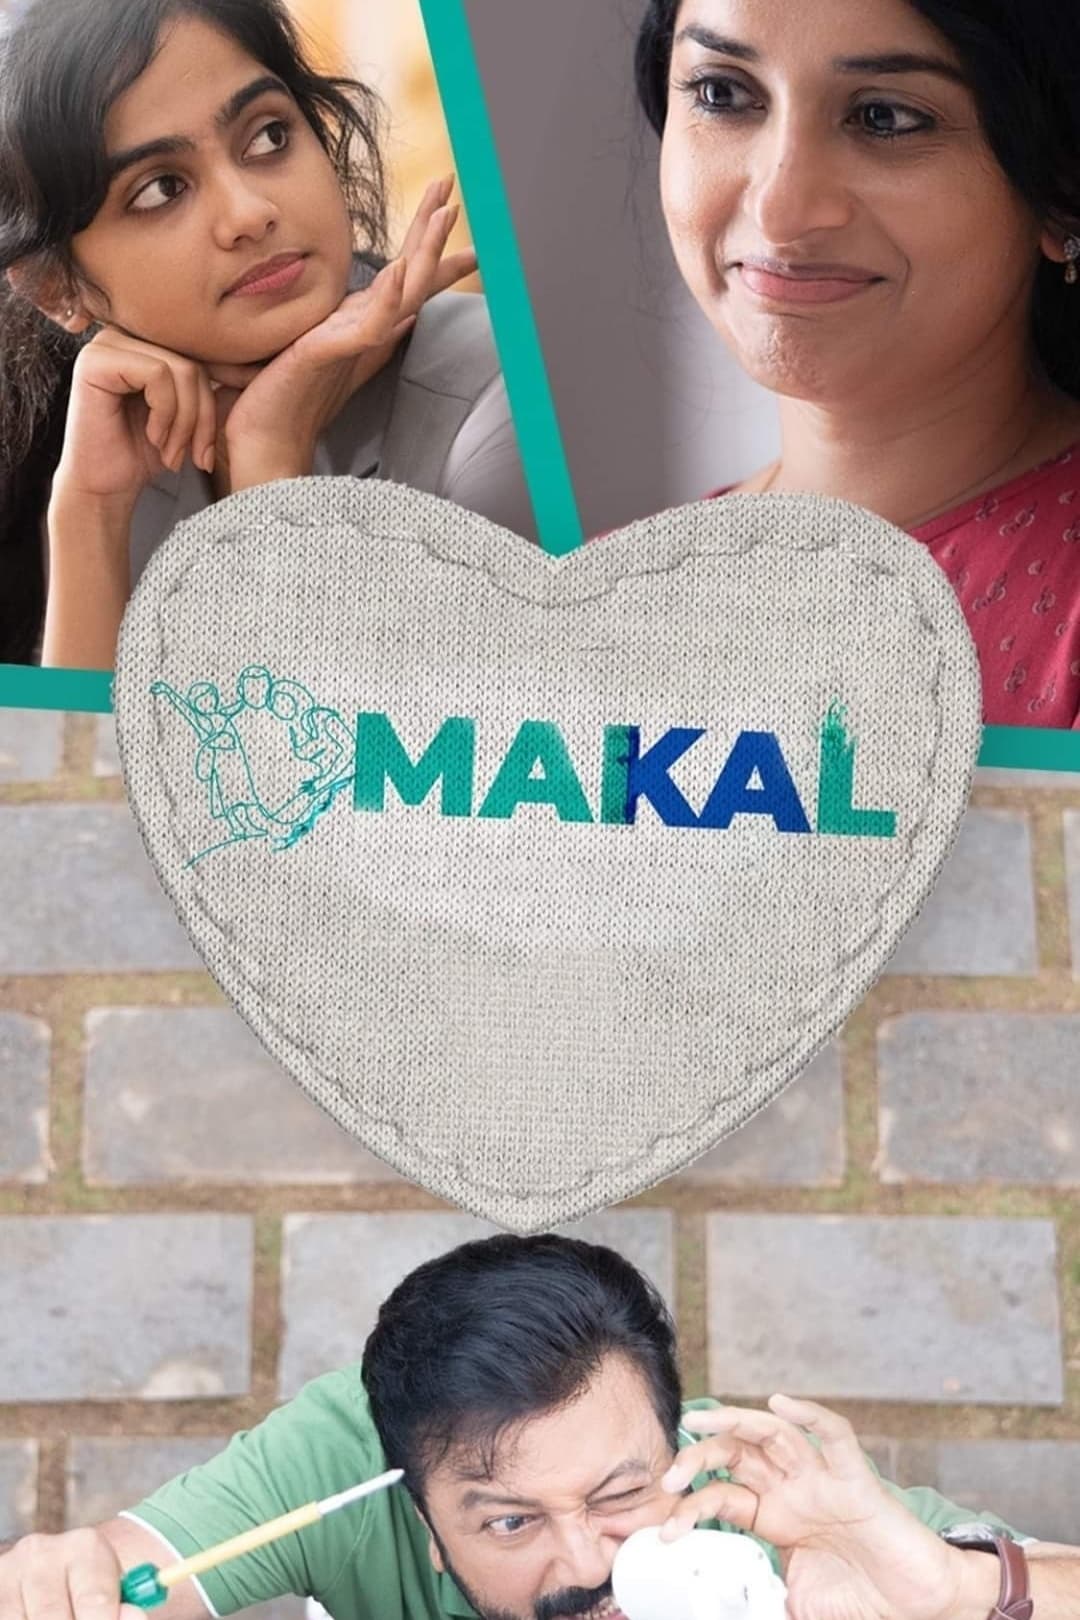 Poster for the movie "Makal"